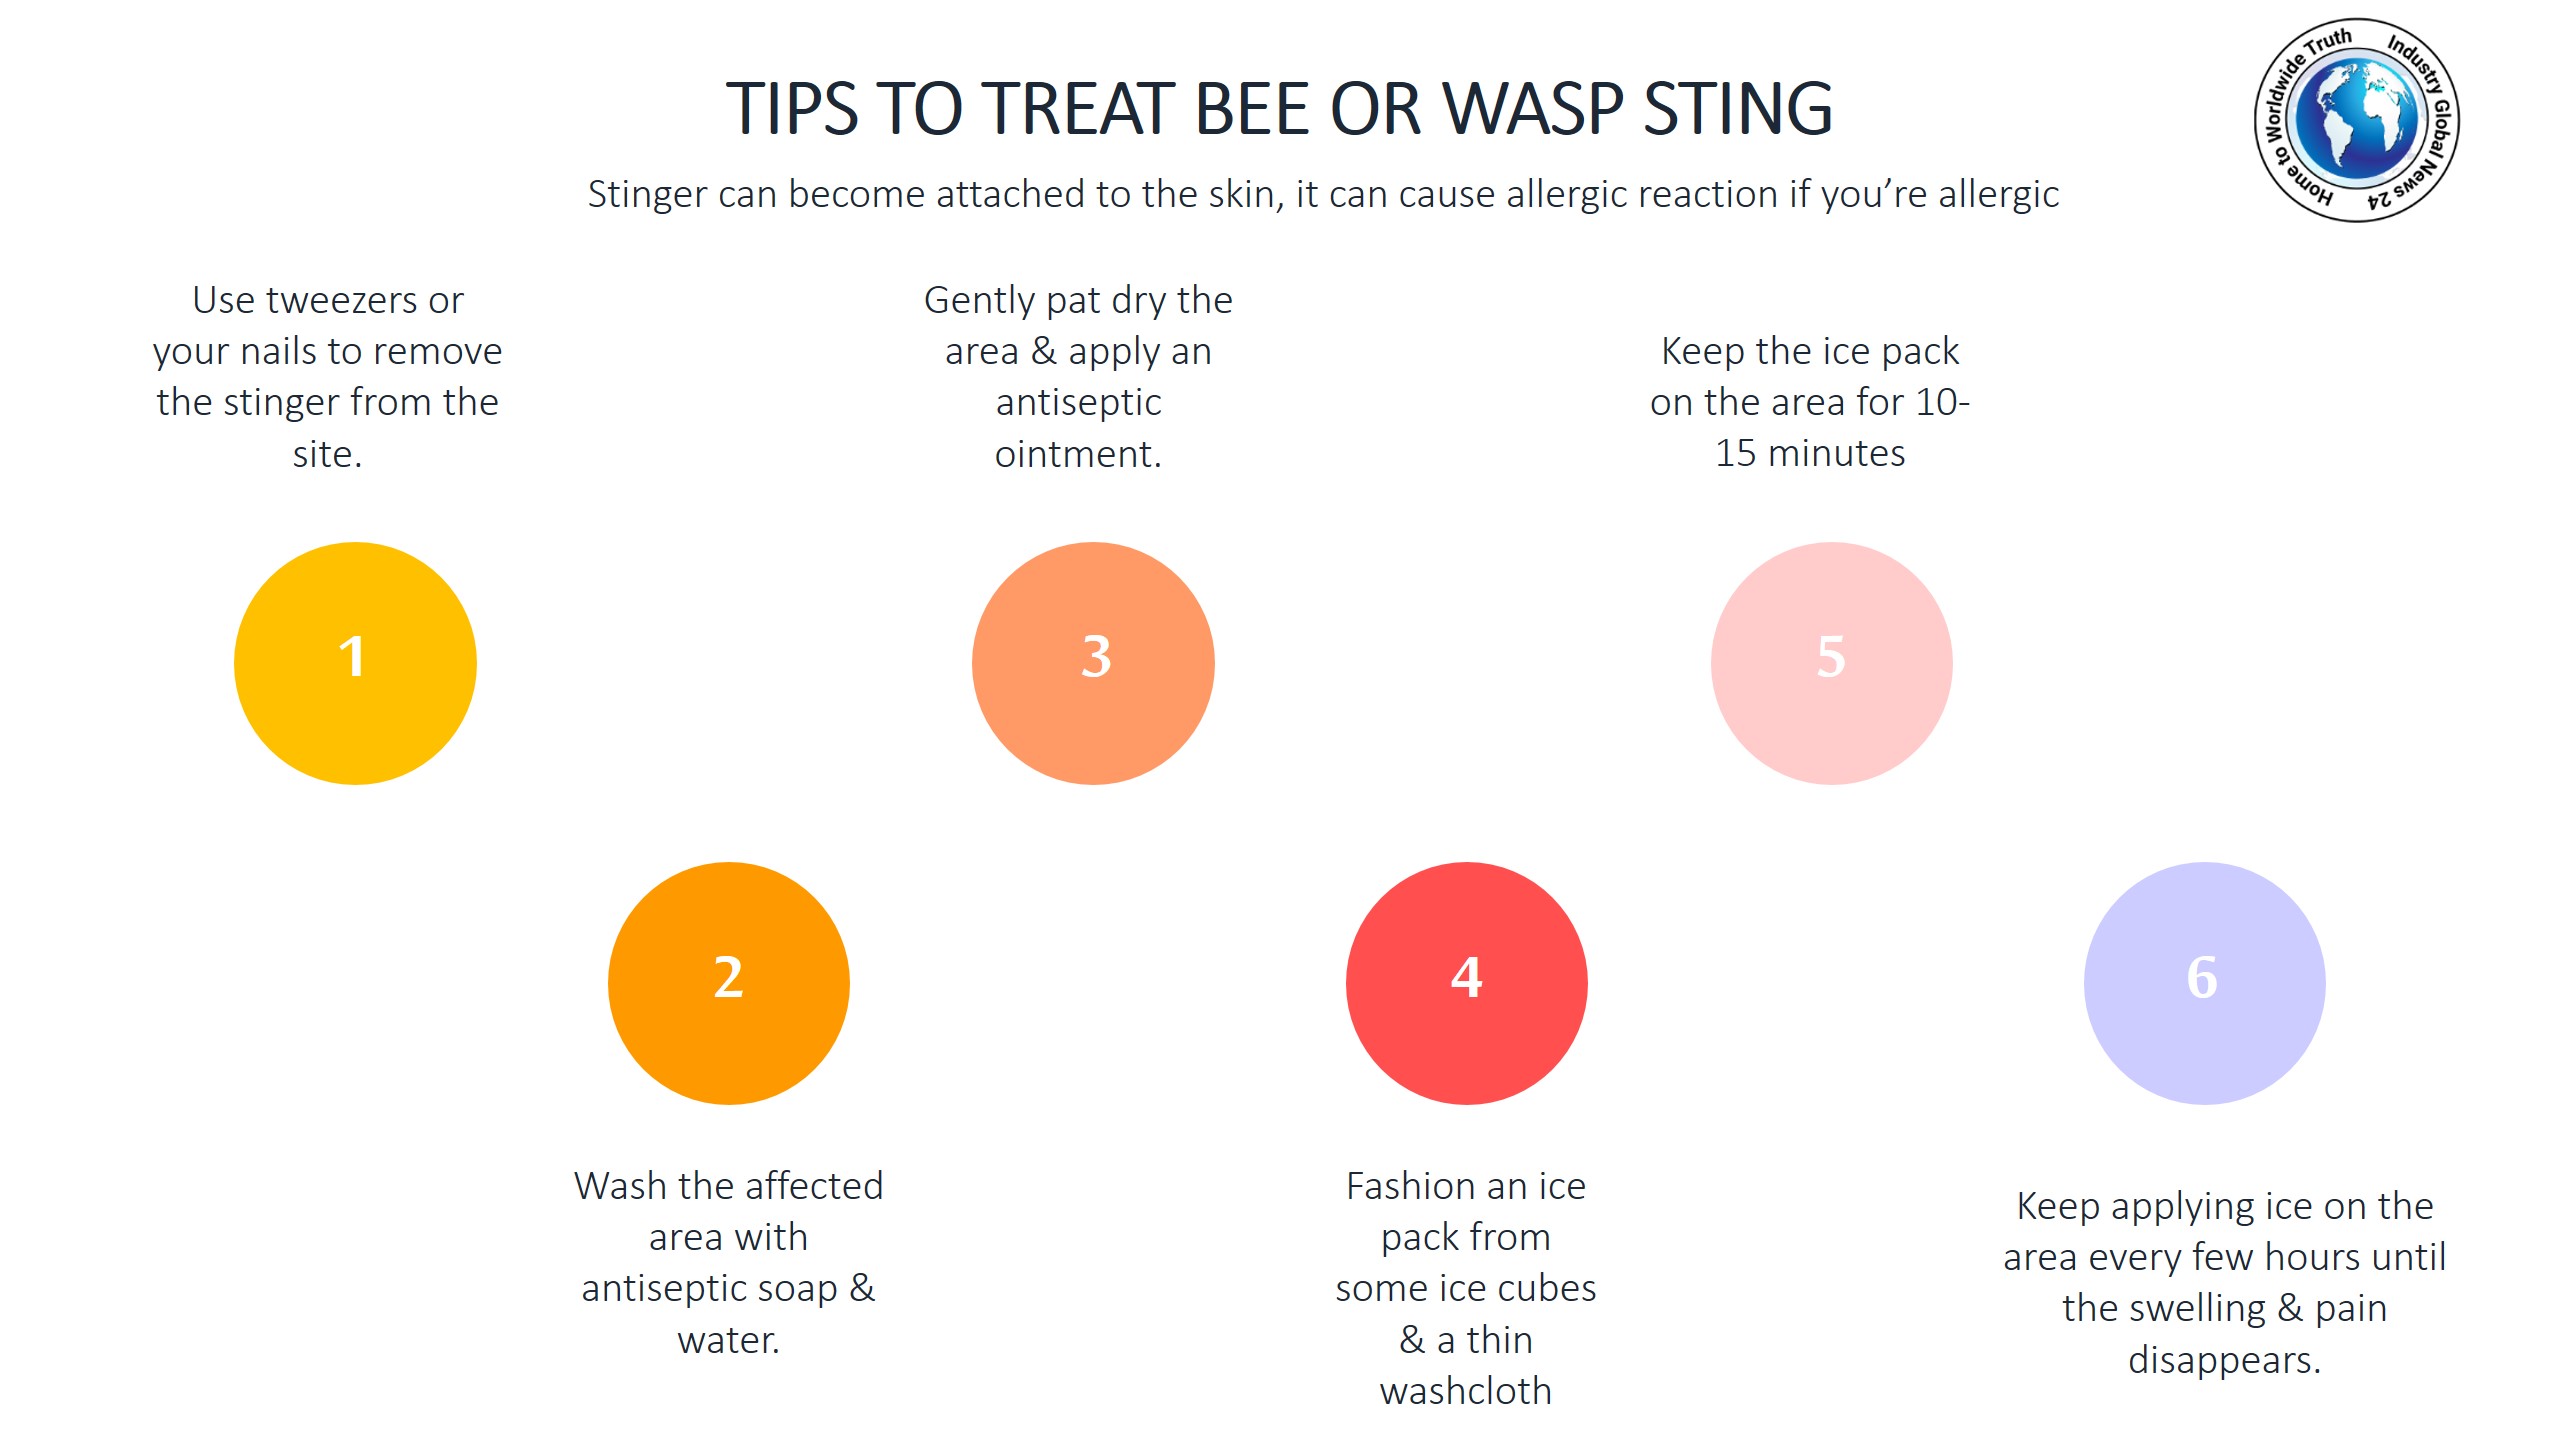 Tips to treat bee or wasp sting